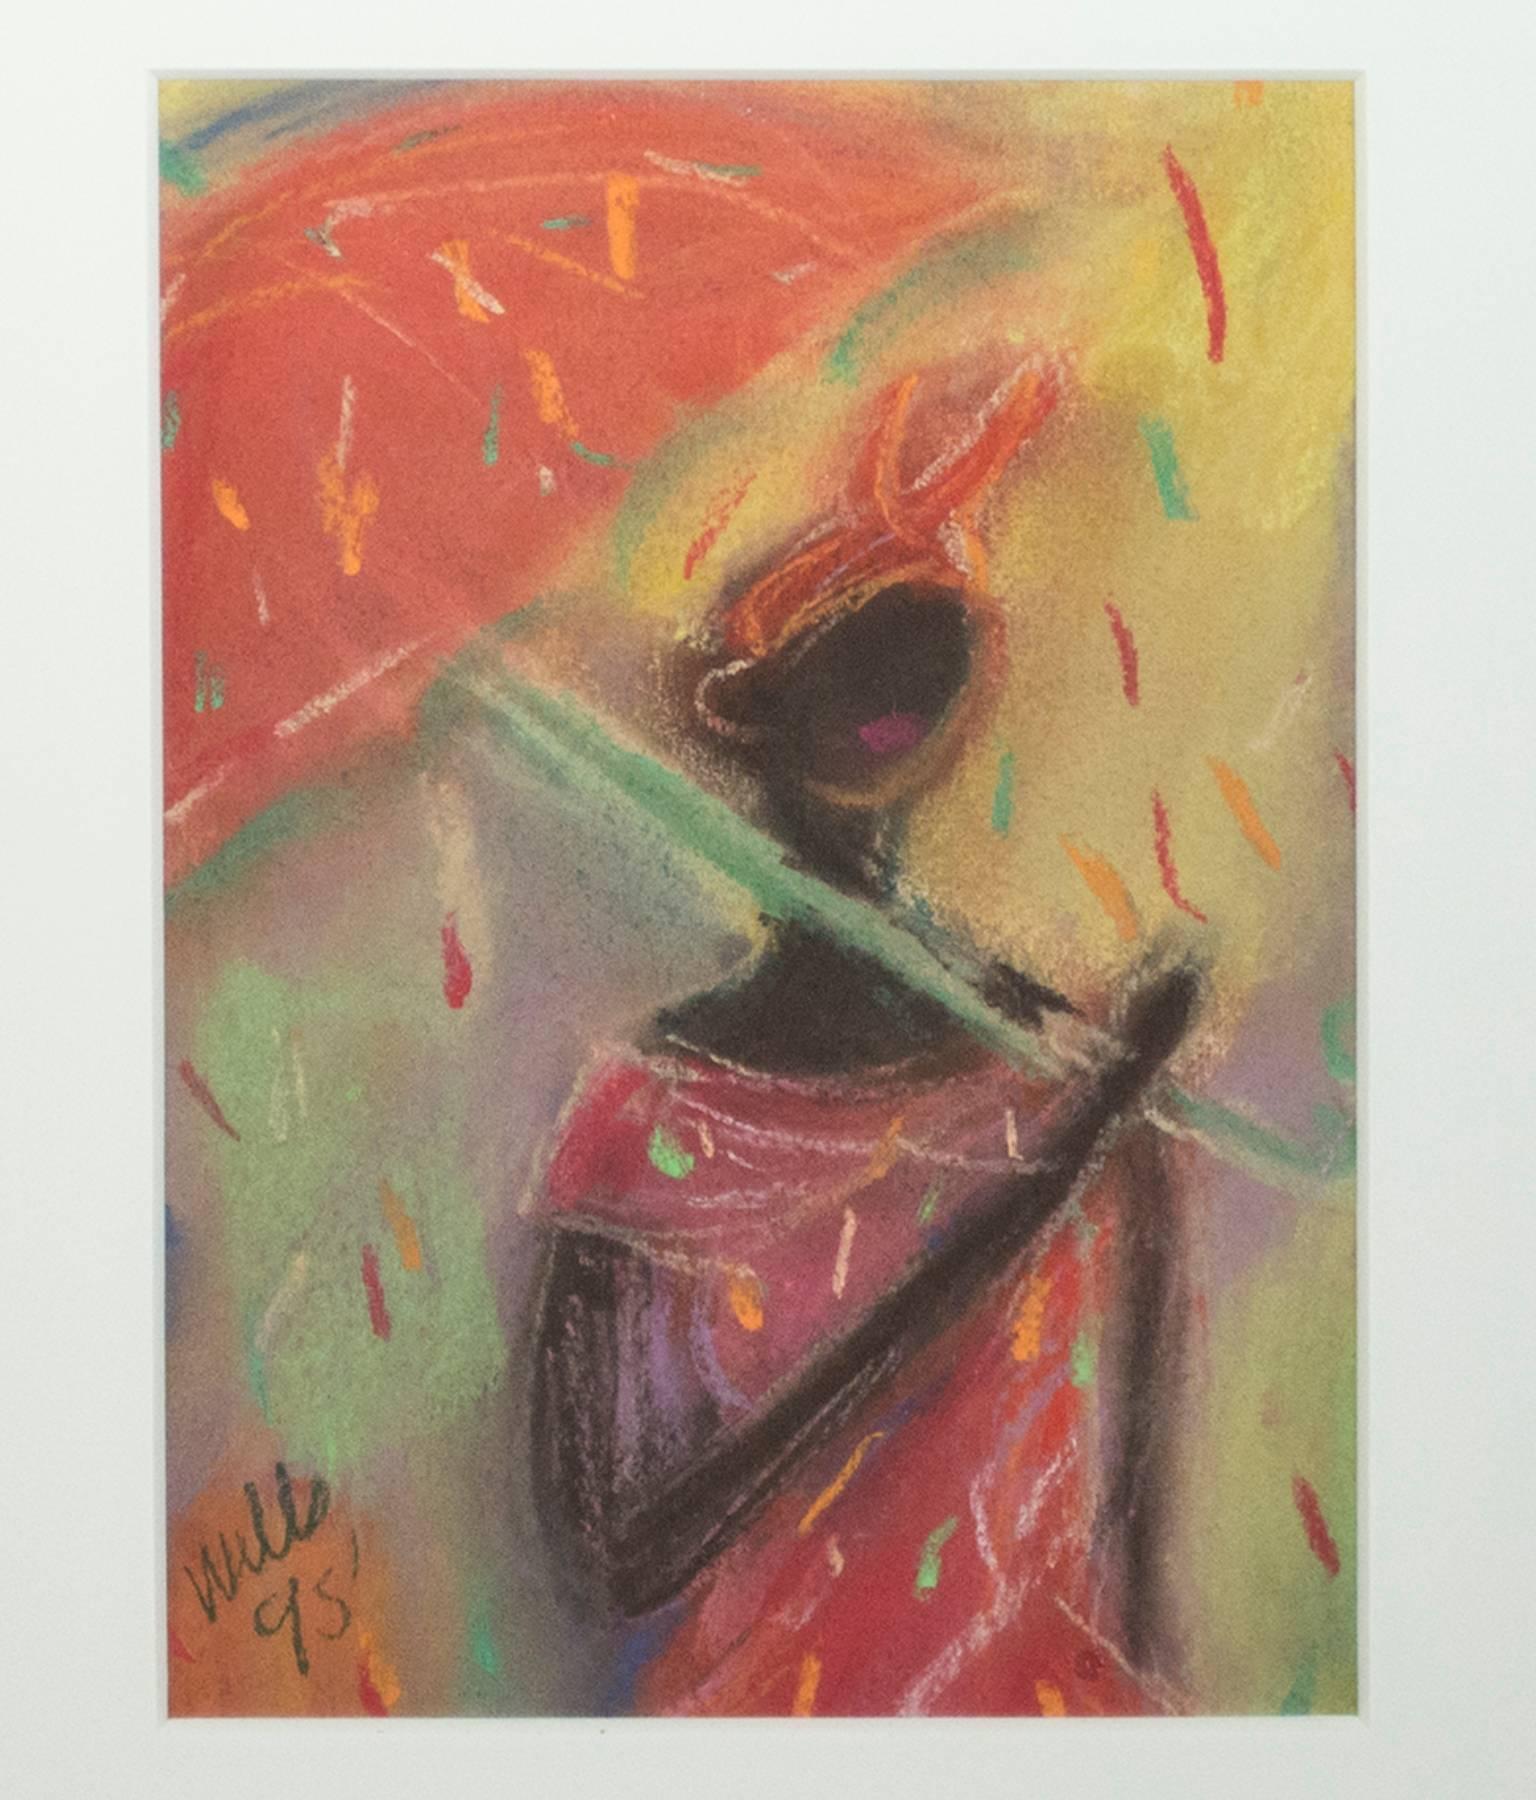 "Umbrella Woman" is an original pastel drawing by Della Wells signed in the lower left. It depicts a dark-skinned woman holding a salmon-colored umbrella as she walks through colorful rain. This picture may represent a woman in Mambo Land, a